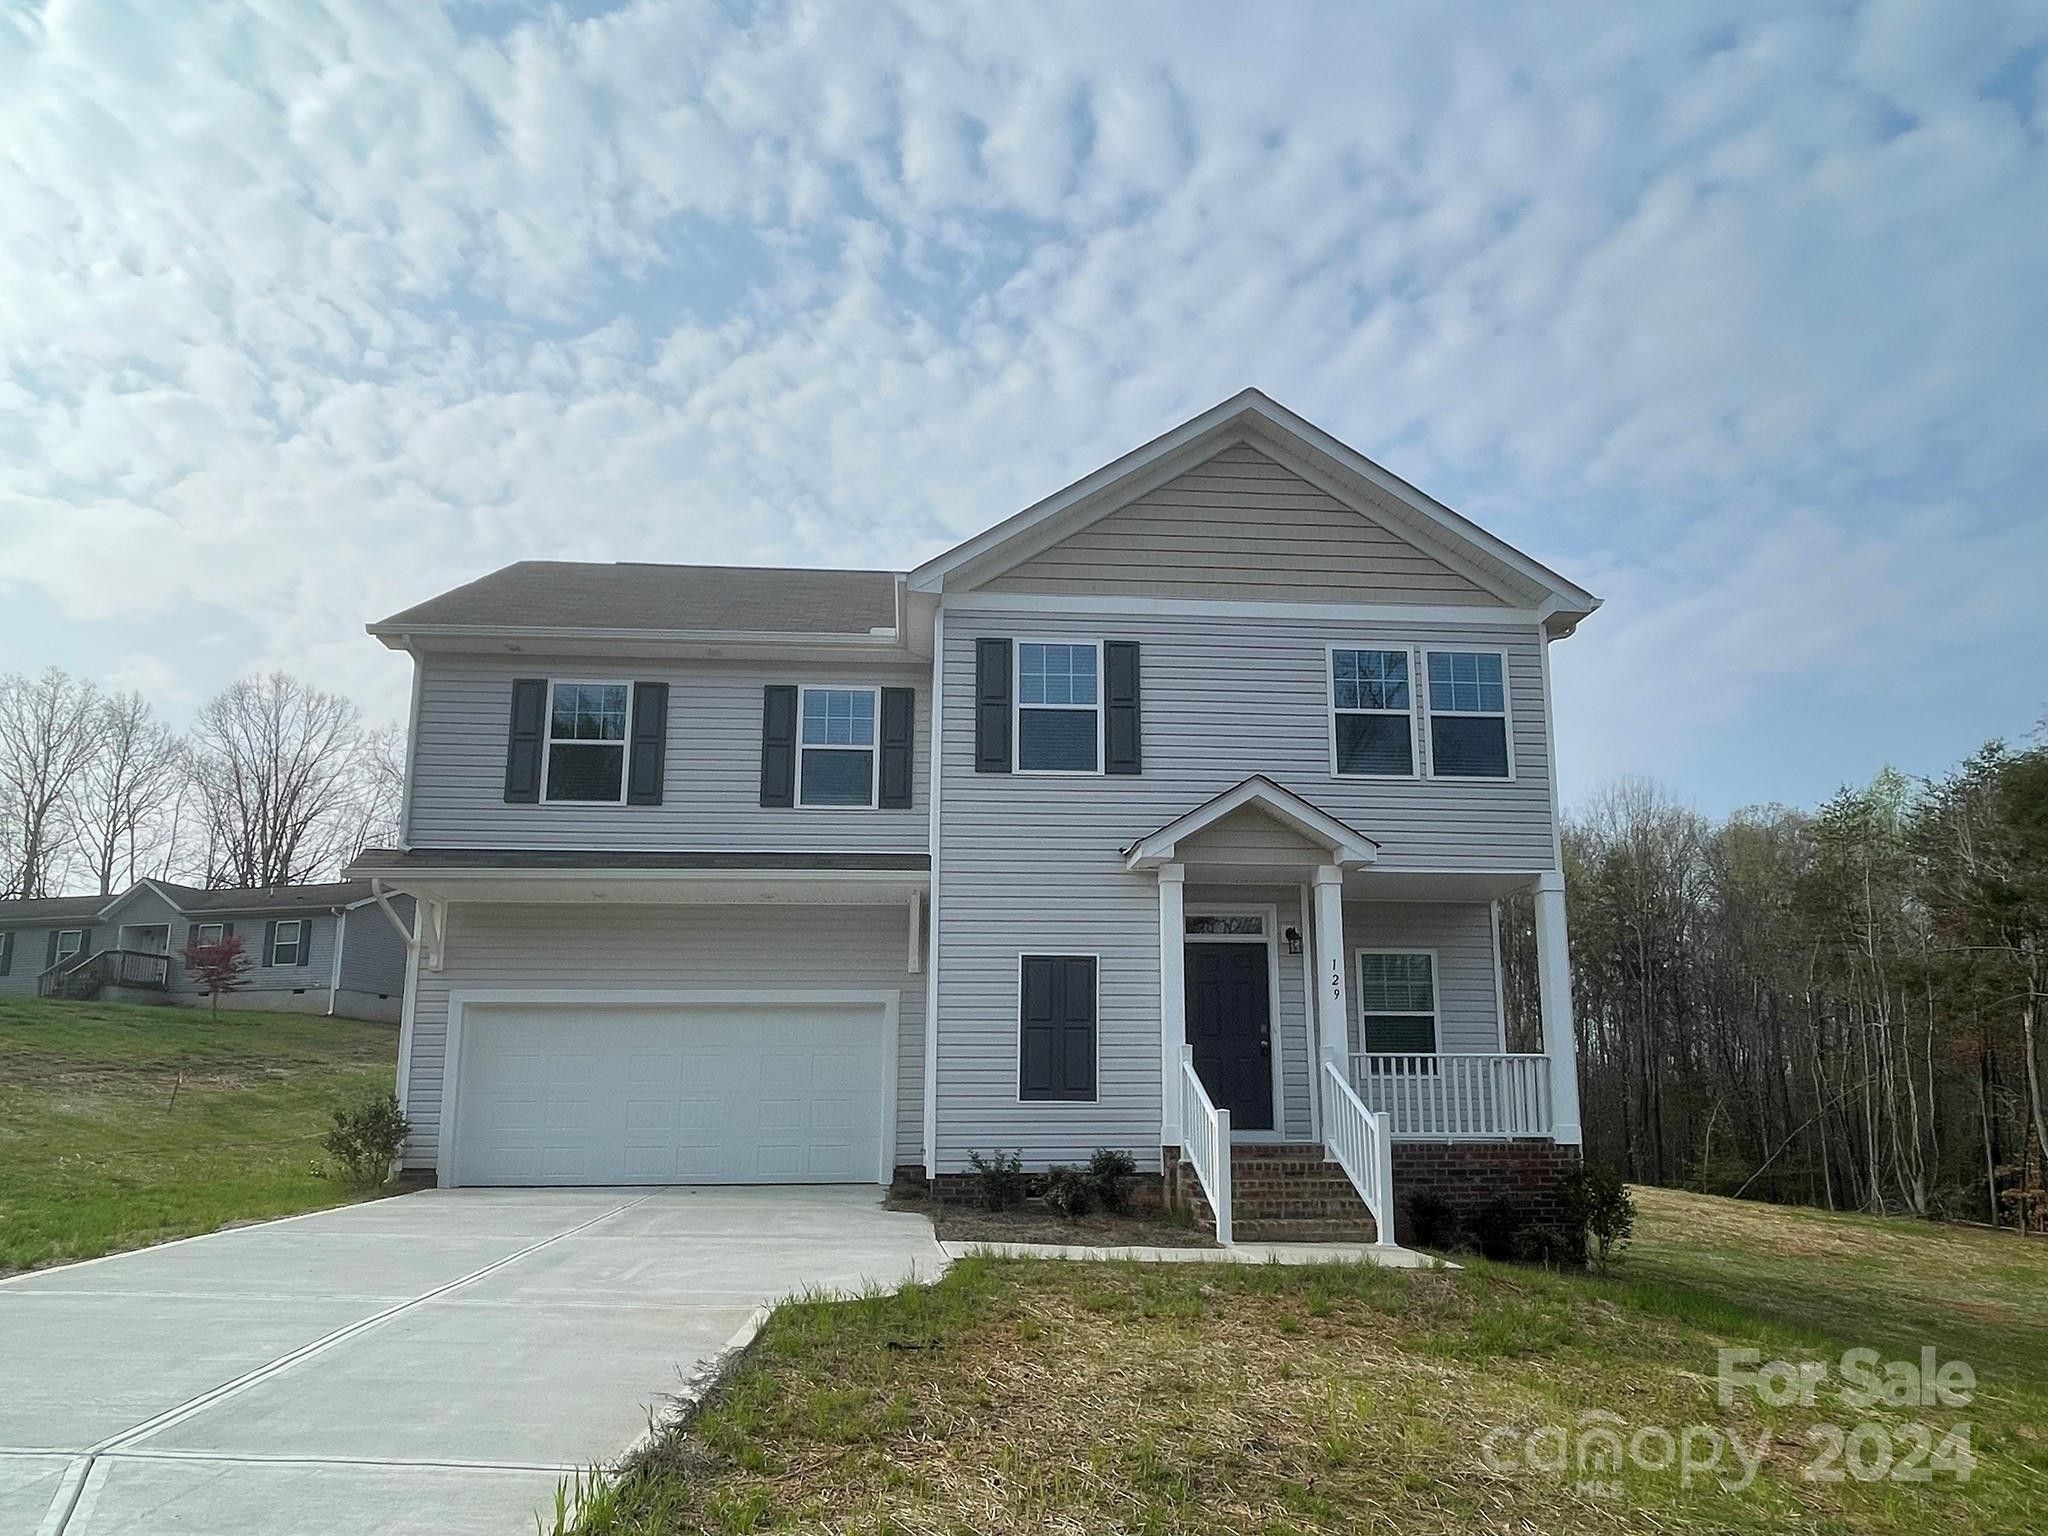 129 Taylor Made Drive. Statesville, NC 28677